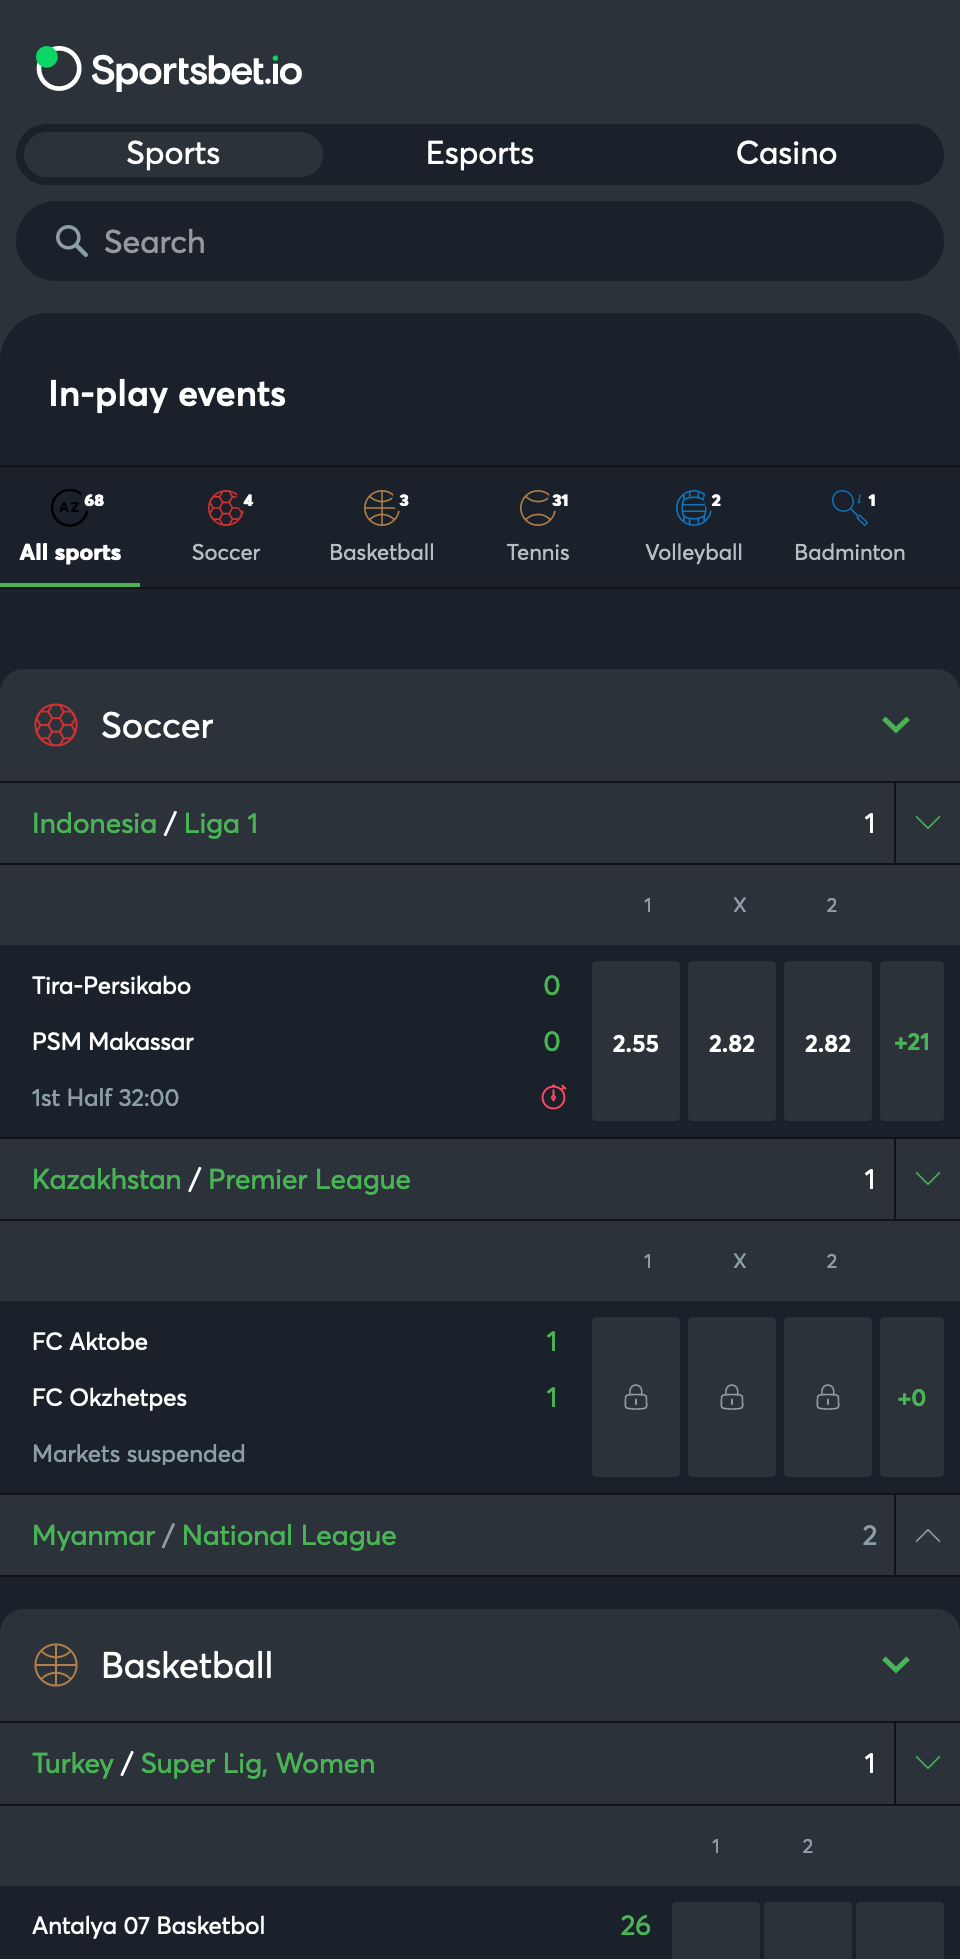 The Sportsbetio app features a fairly broad sportsbook with dozens of sports